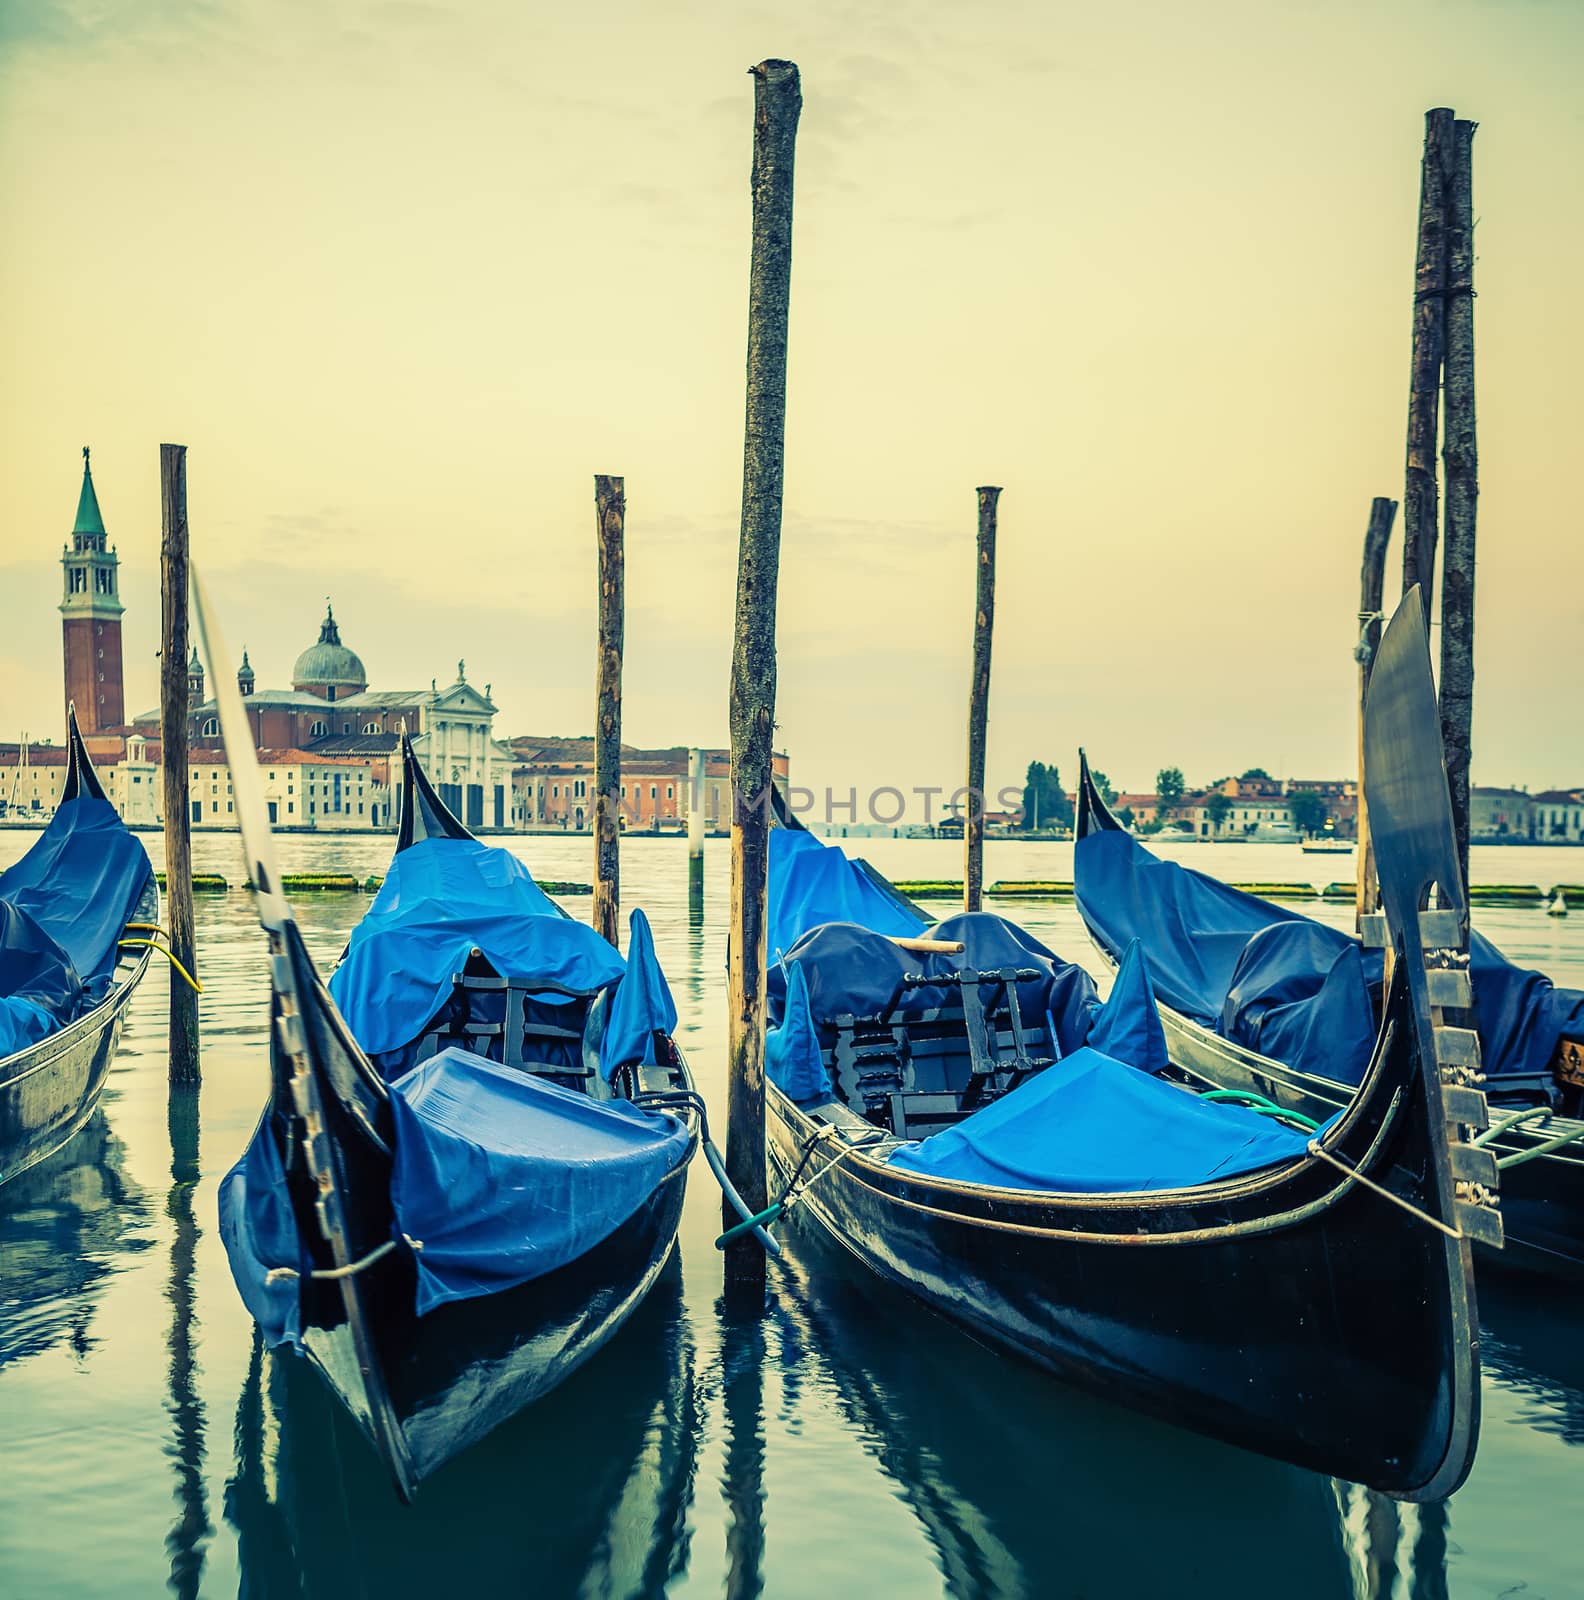 Gondolas floating in the Grand Canal at sunset by vwalakte